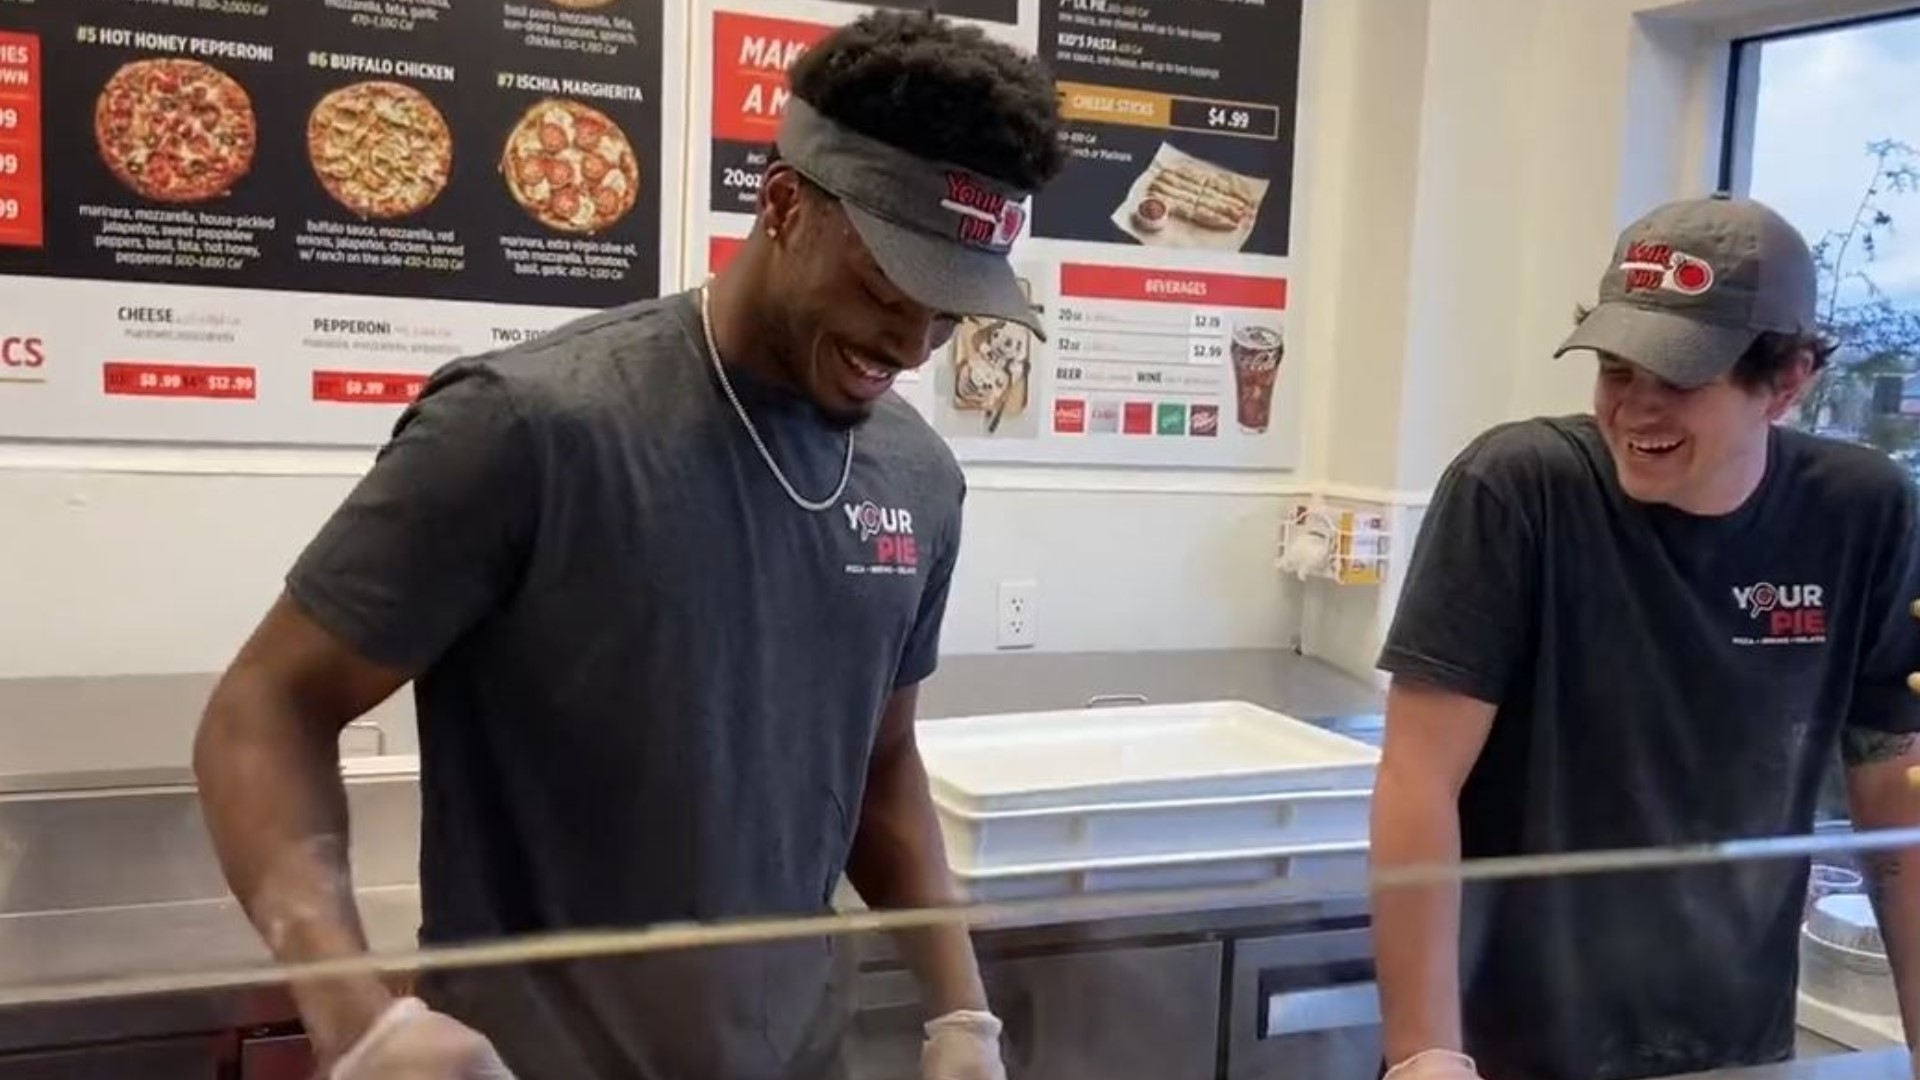 The defensive back celebrated his national championship with the Georgia Bulldogs by firing up a few pizzas on Thursday.